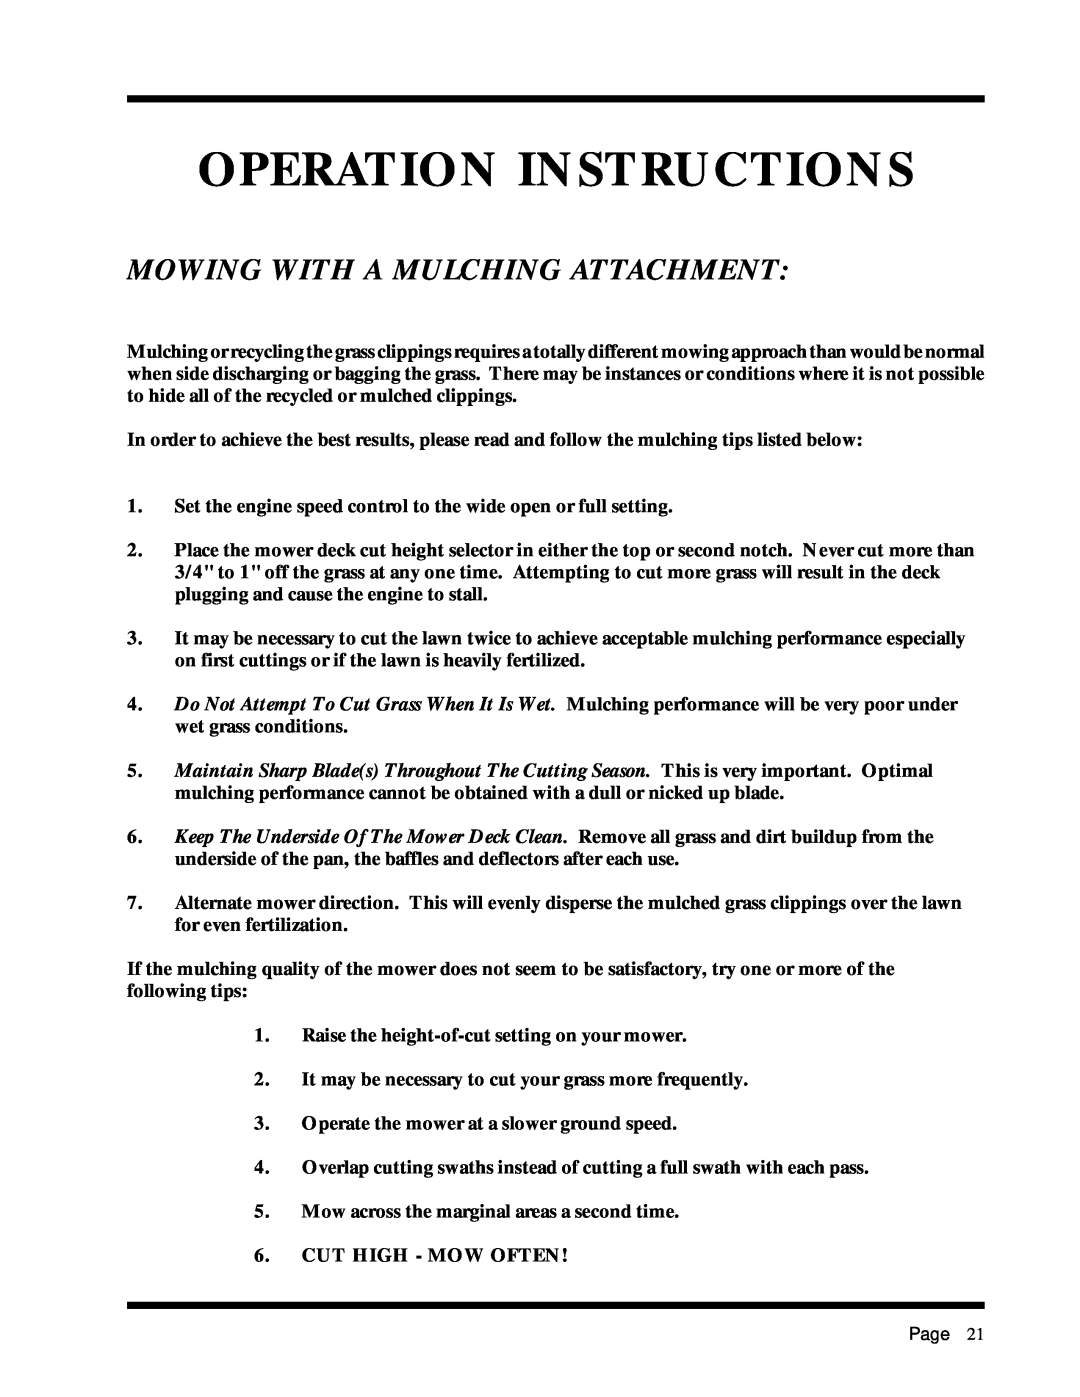 Dixon 6025 manual Mowing With A Mulching Attachment, Operation Instructions 